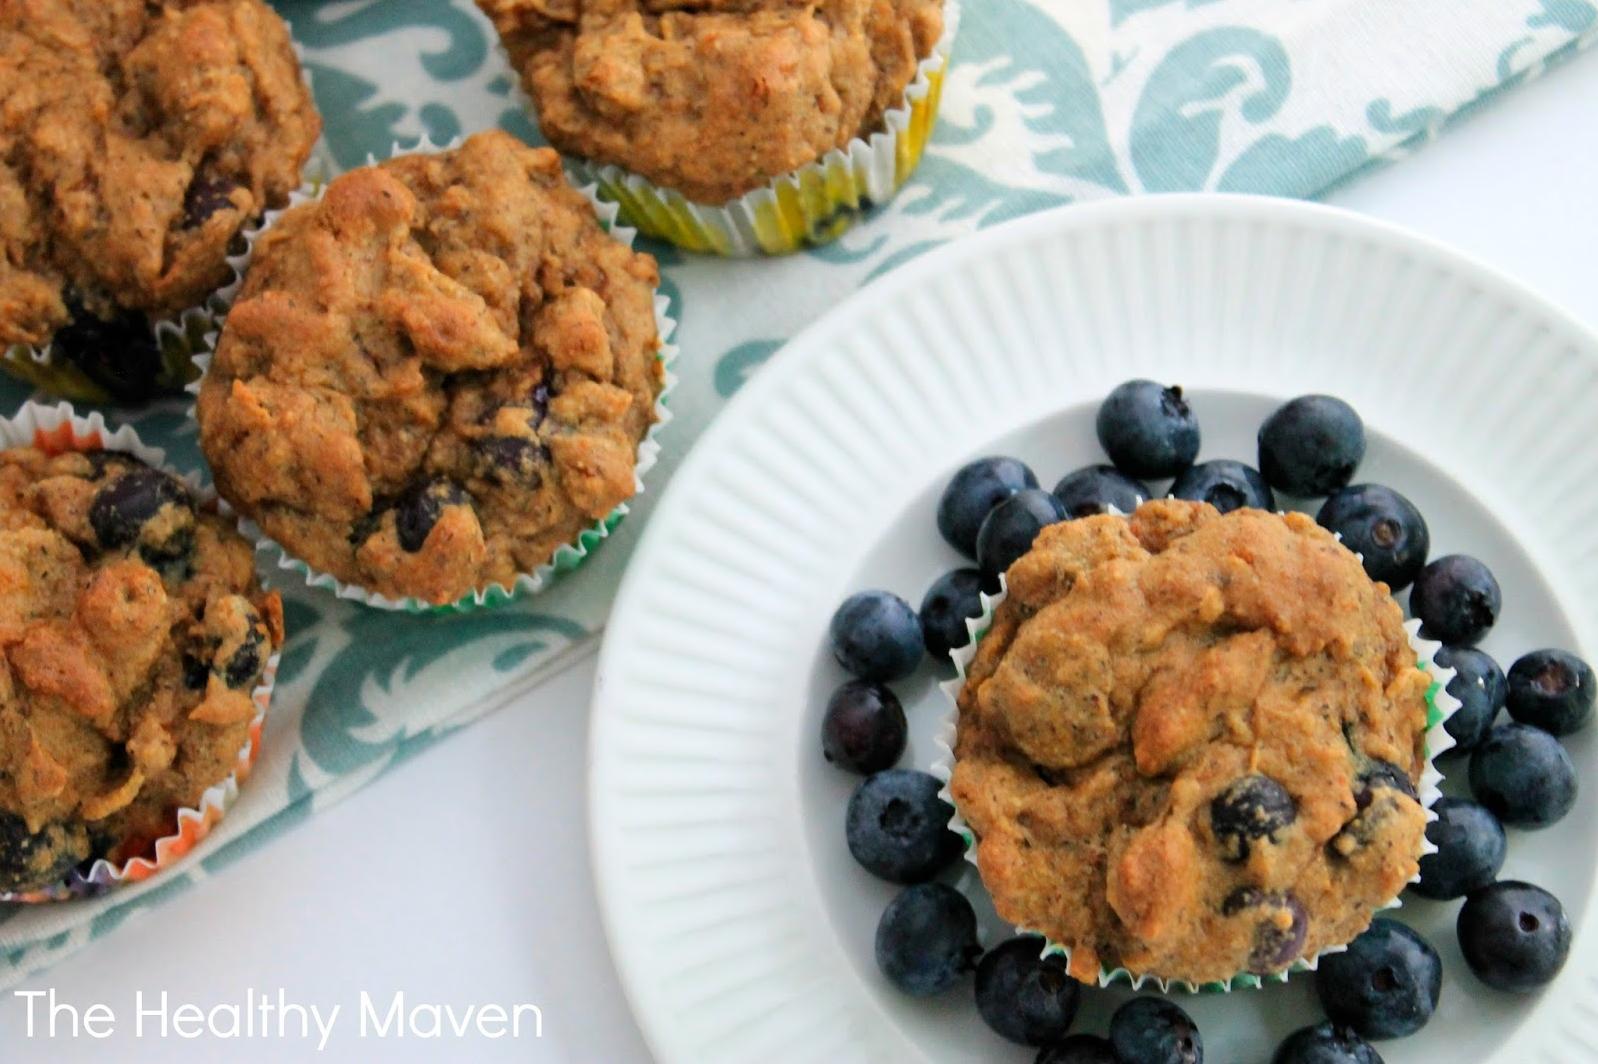  No one will even know these muffins are gluten-free!